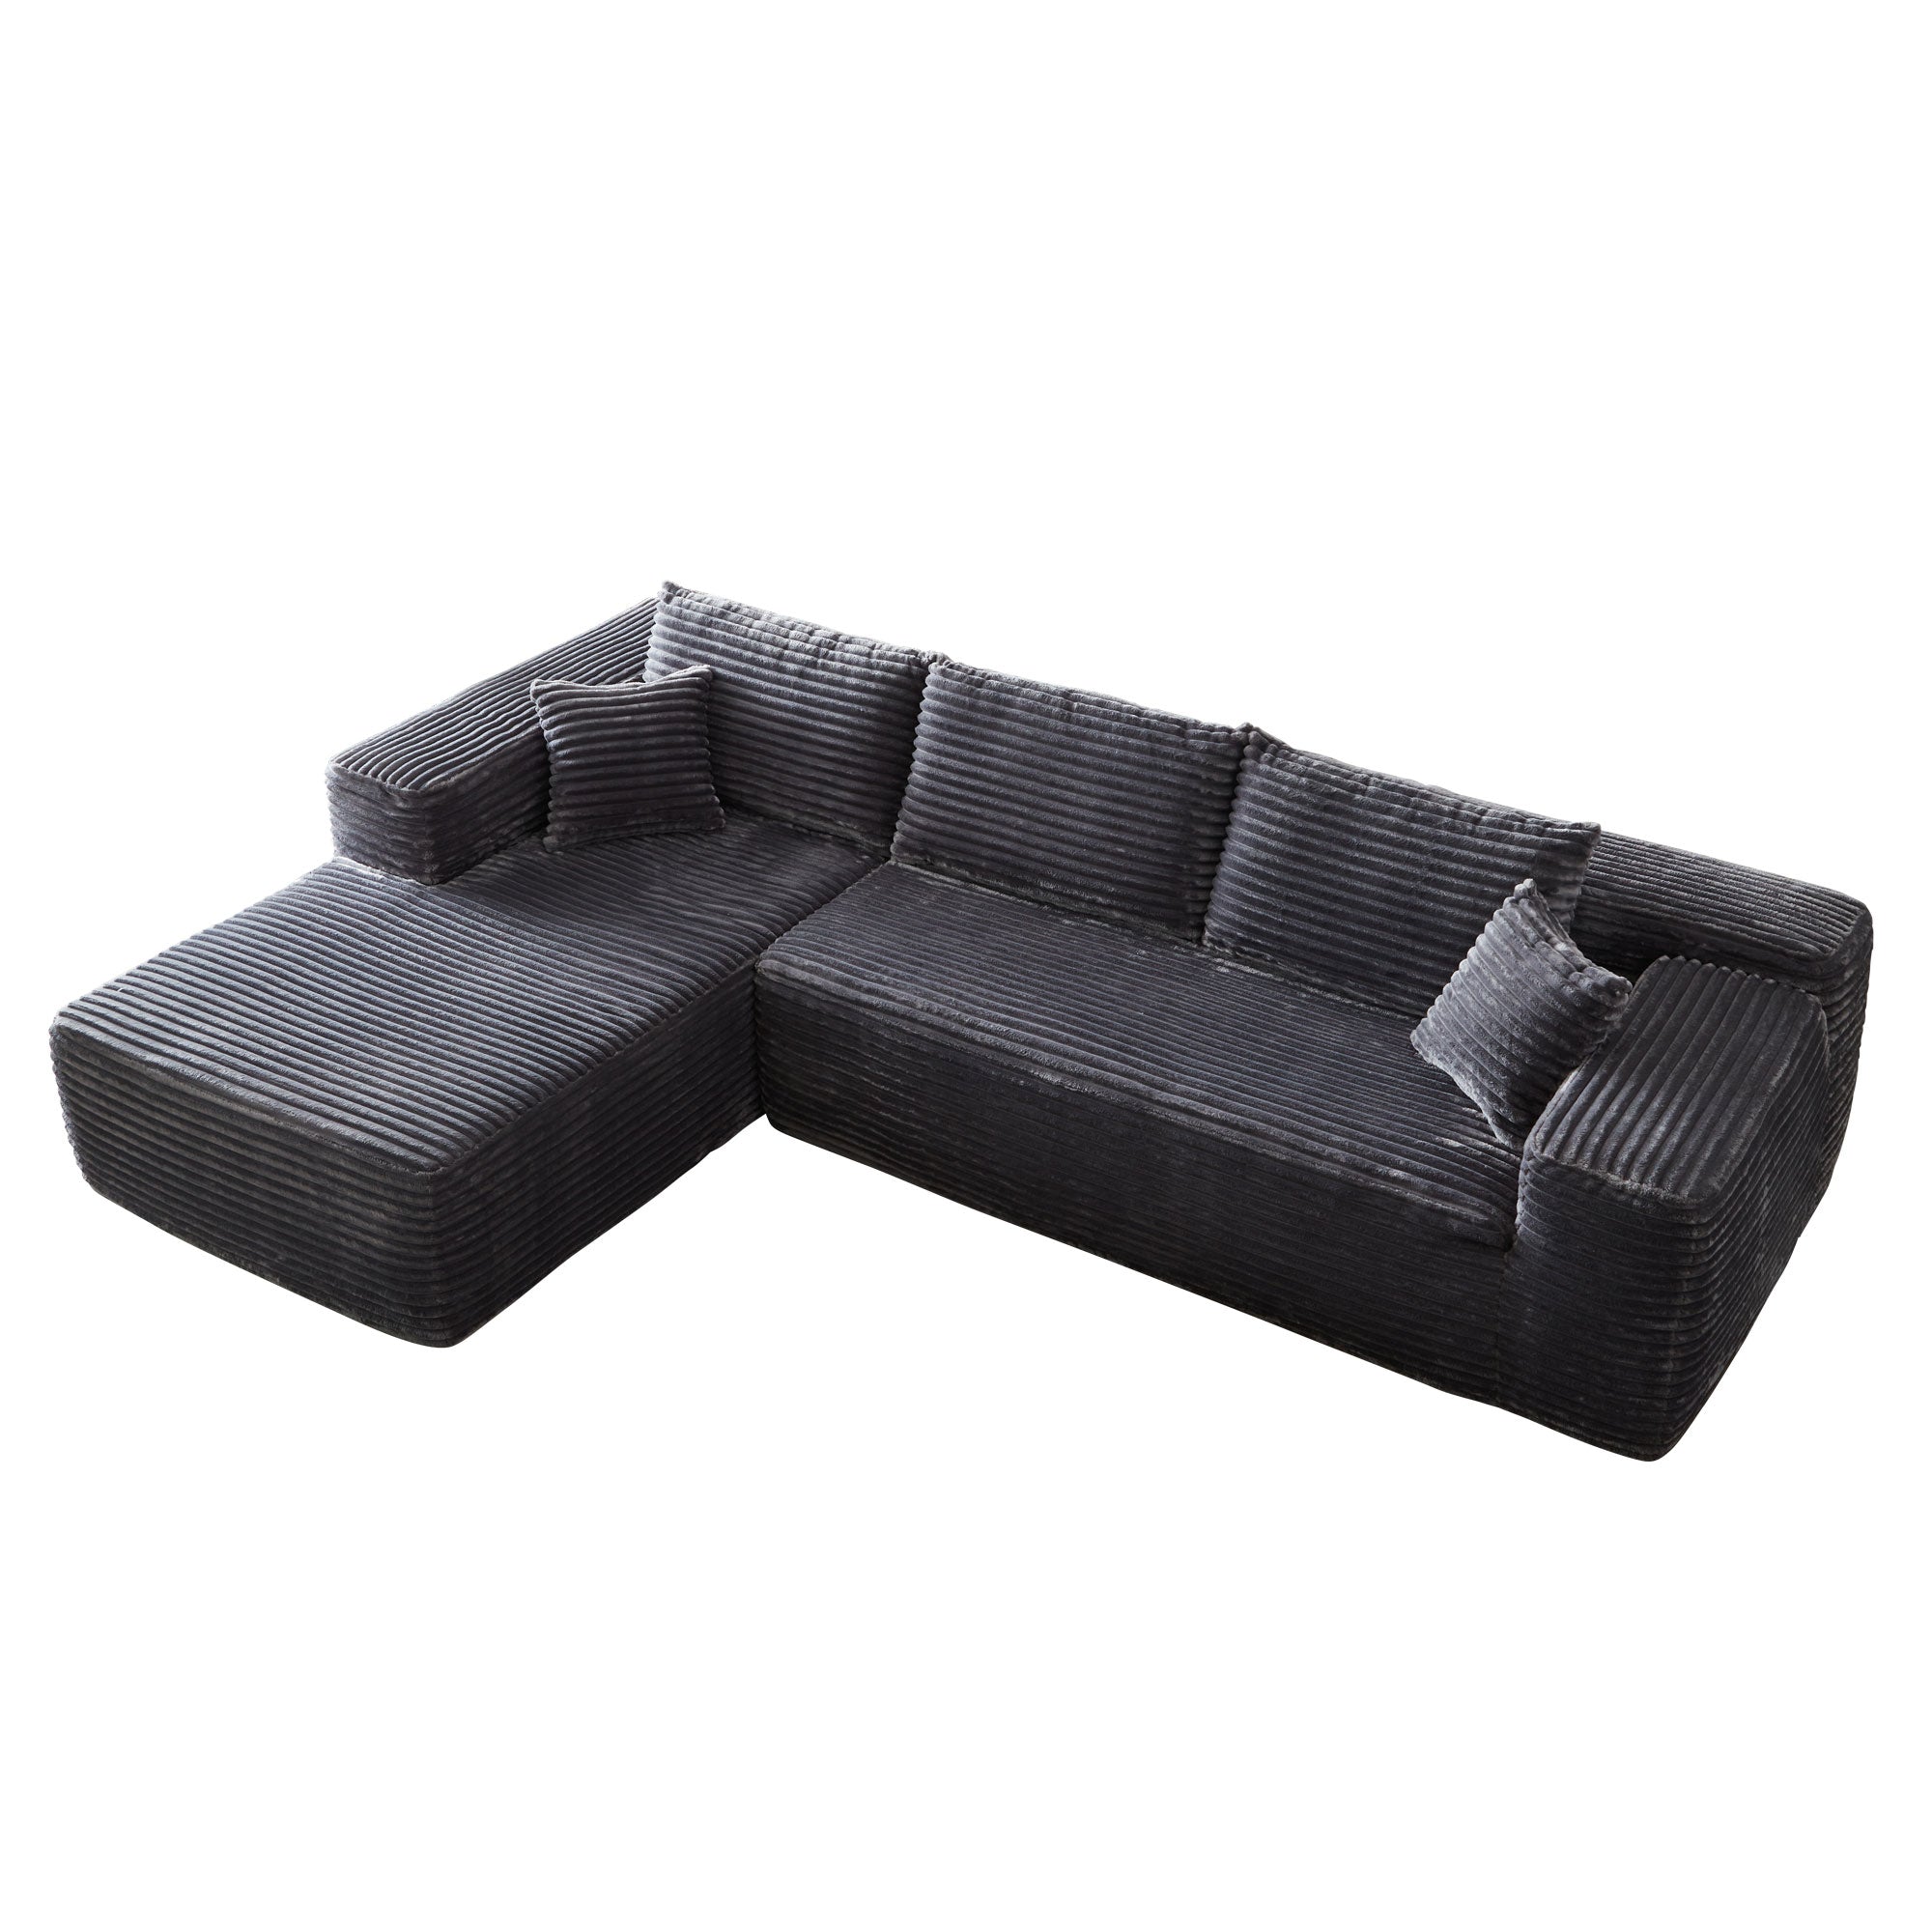 Ovios 104" L-Shape Modular Couch with Chaise, Plush Corduroy Fabric, No Assembly Required